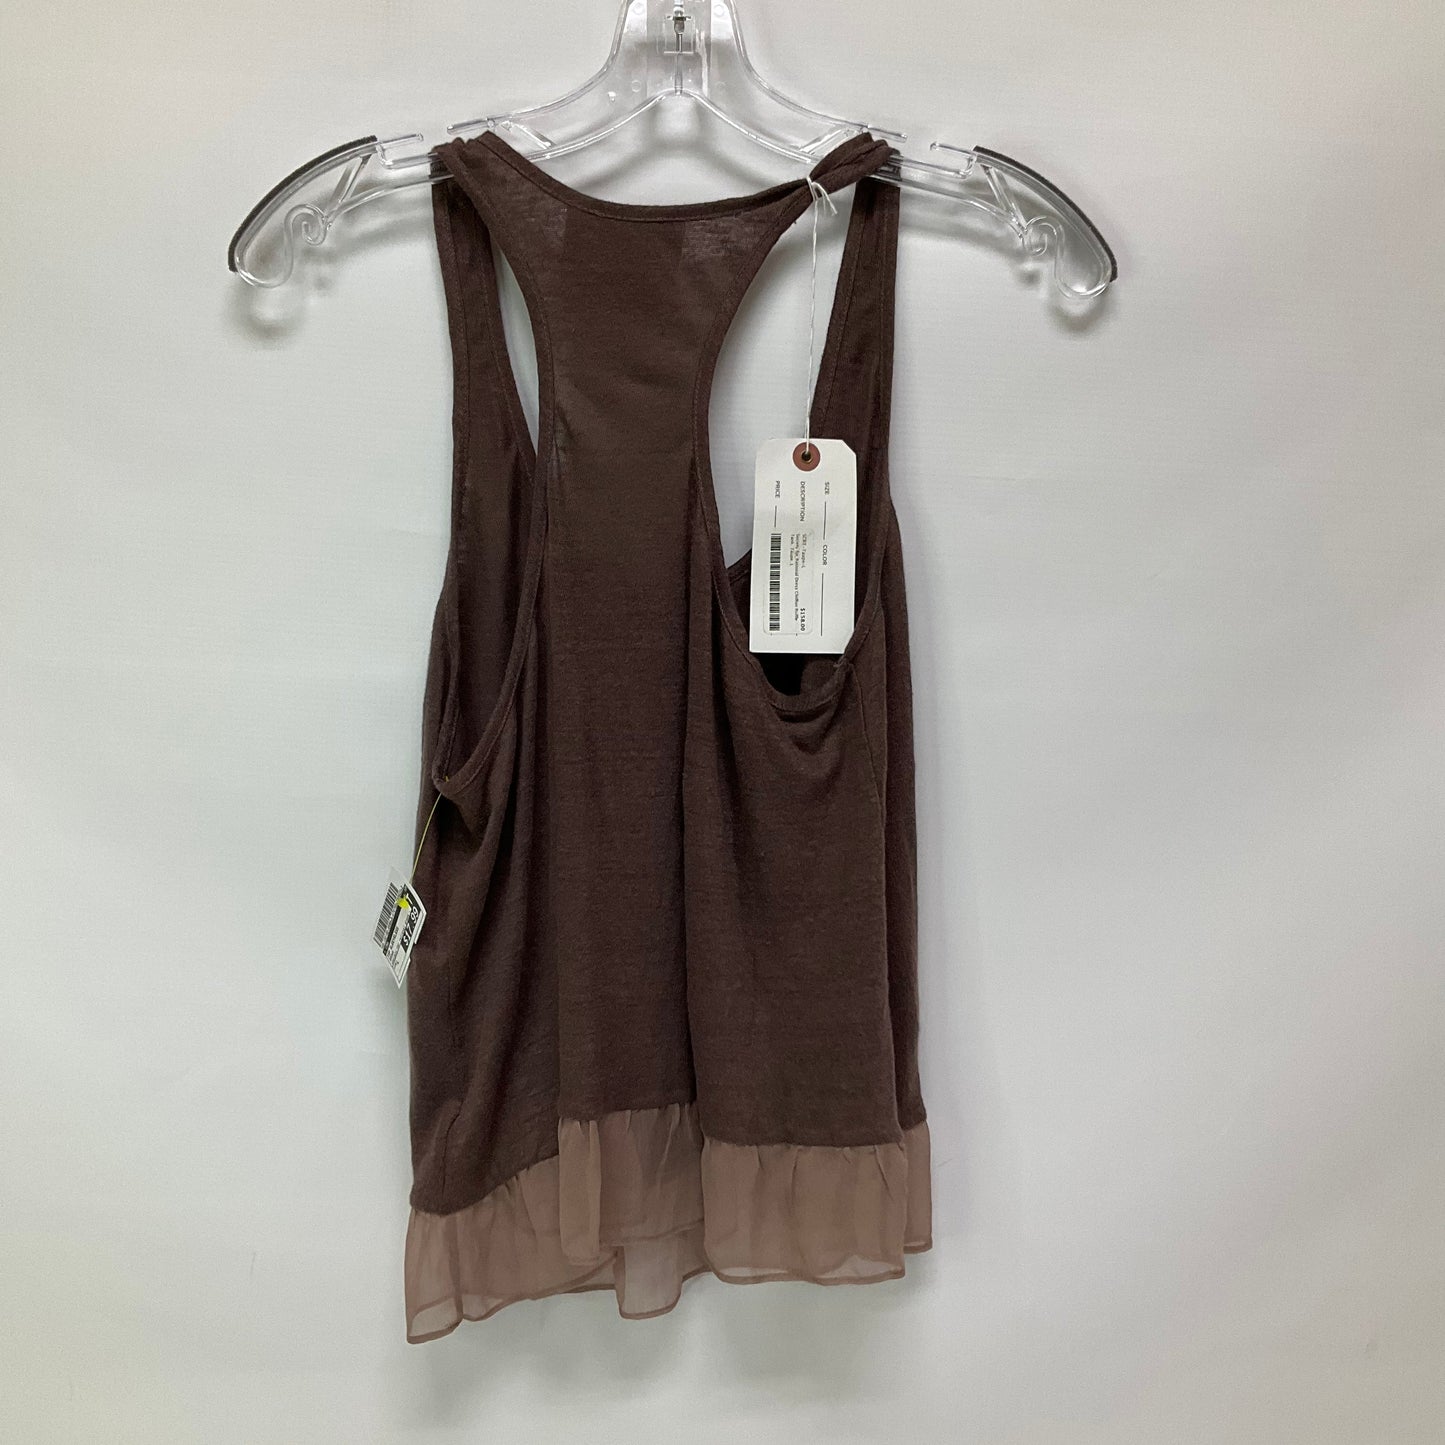 Top Sleeveless By Cma  Size: L